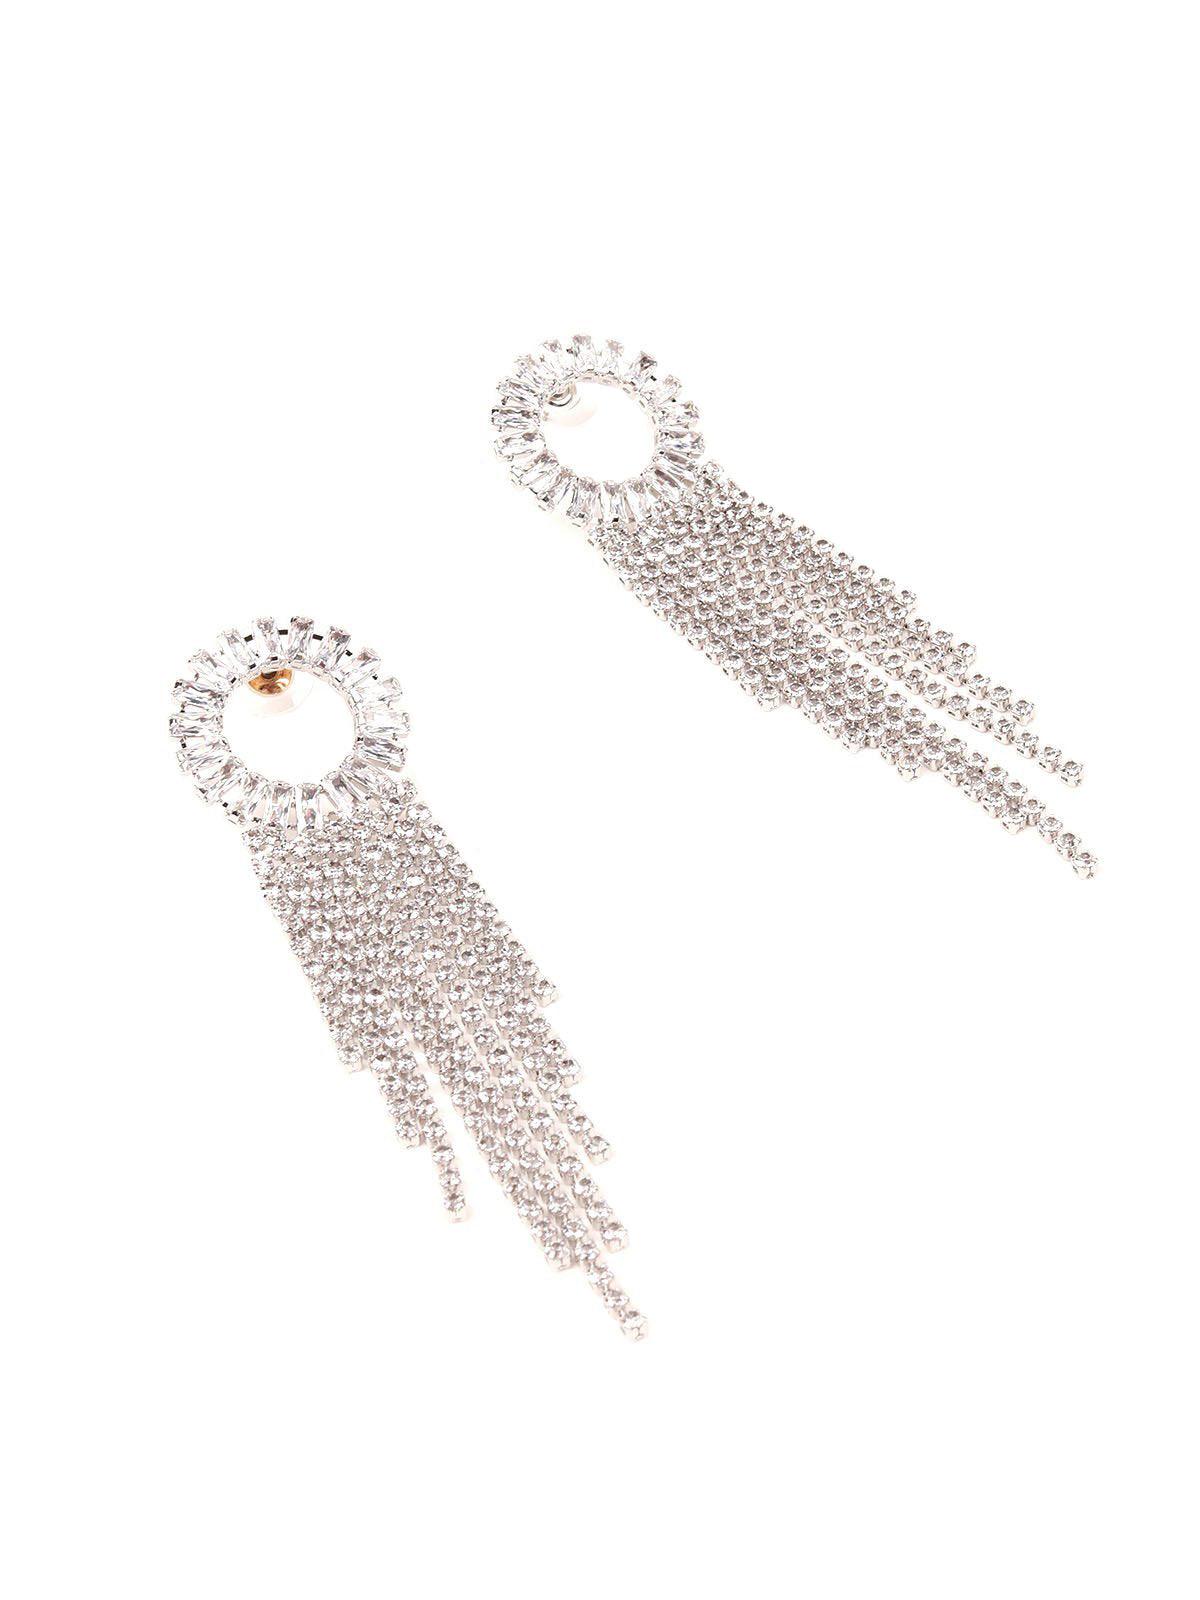 Women's Rounded Crystal Overflowing With Tassels- Silver - Odette